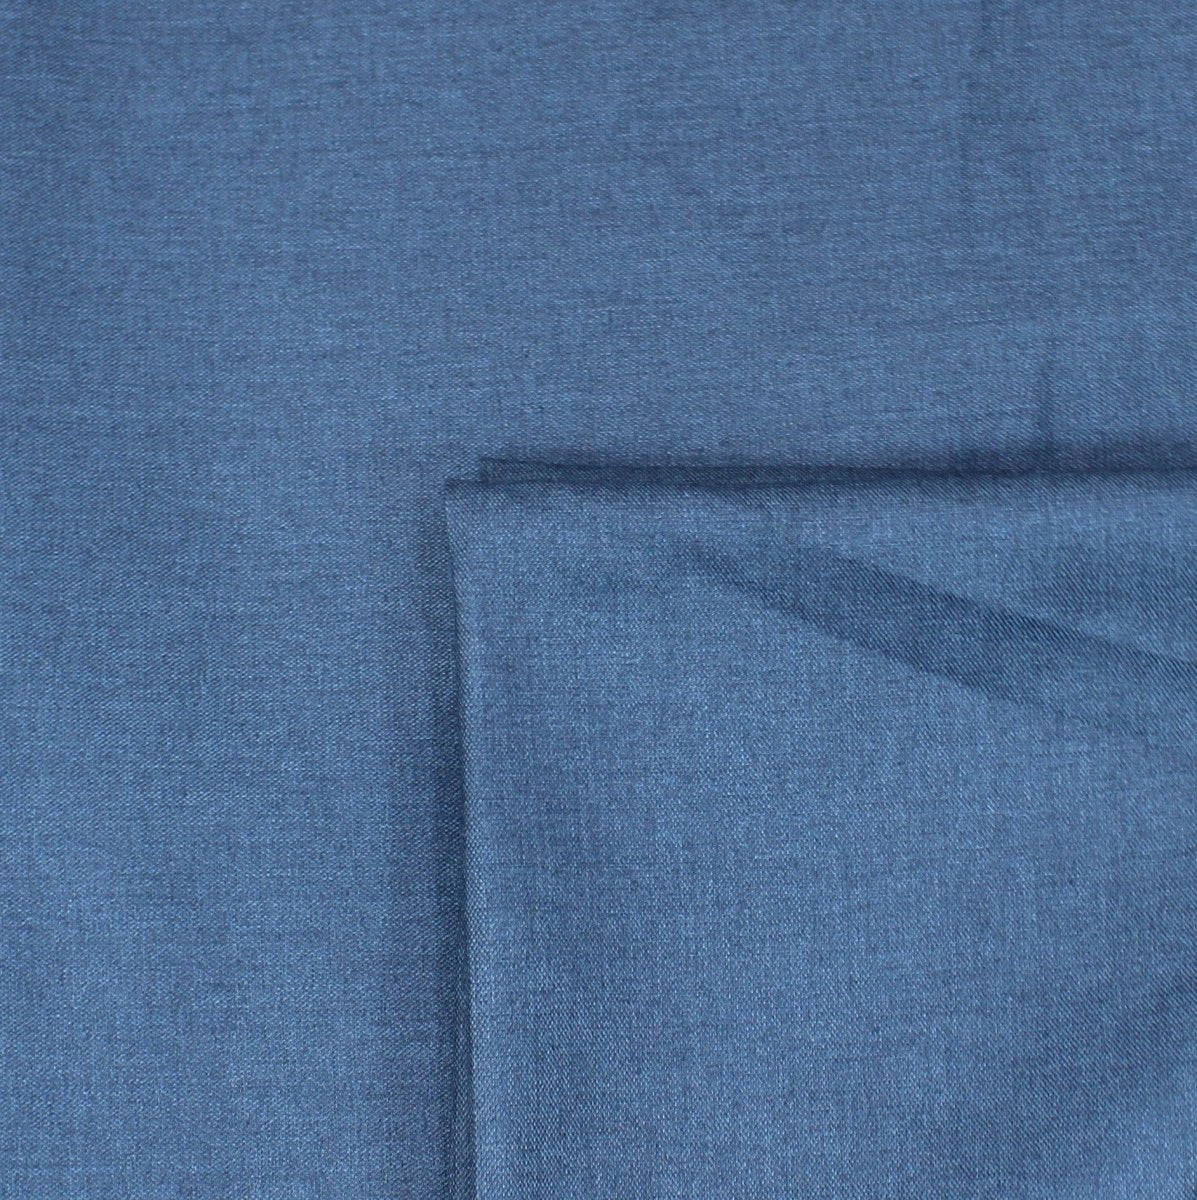 3 Metres Premium Quality Viscose Blend Suiting Fabric 55" Wide Midnight Navy - Pound A Metre